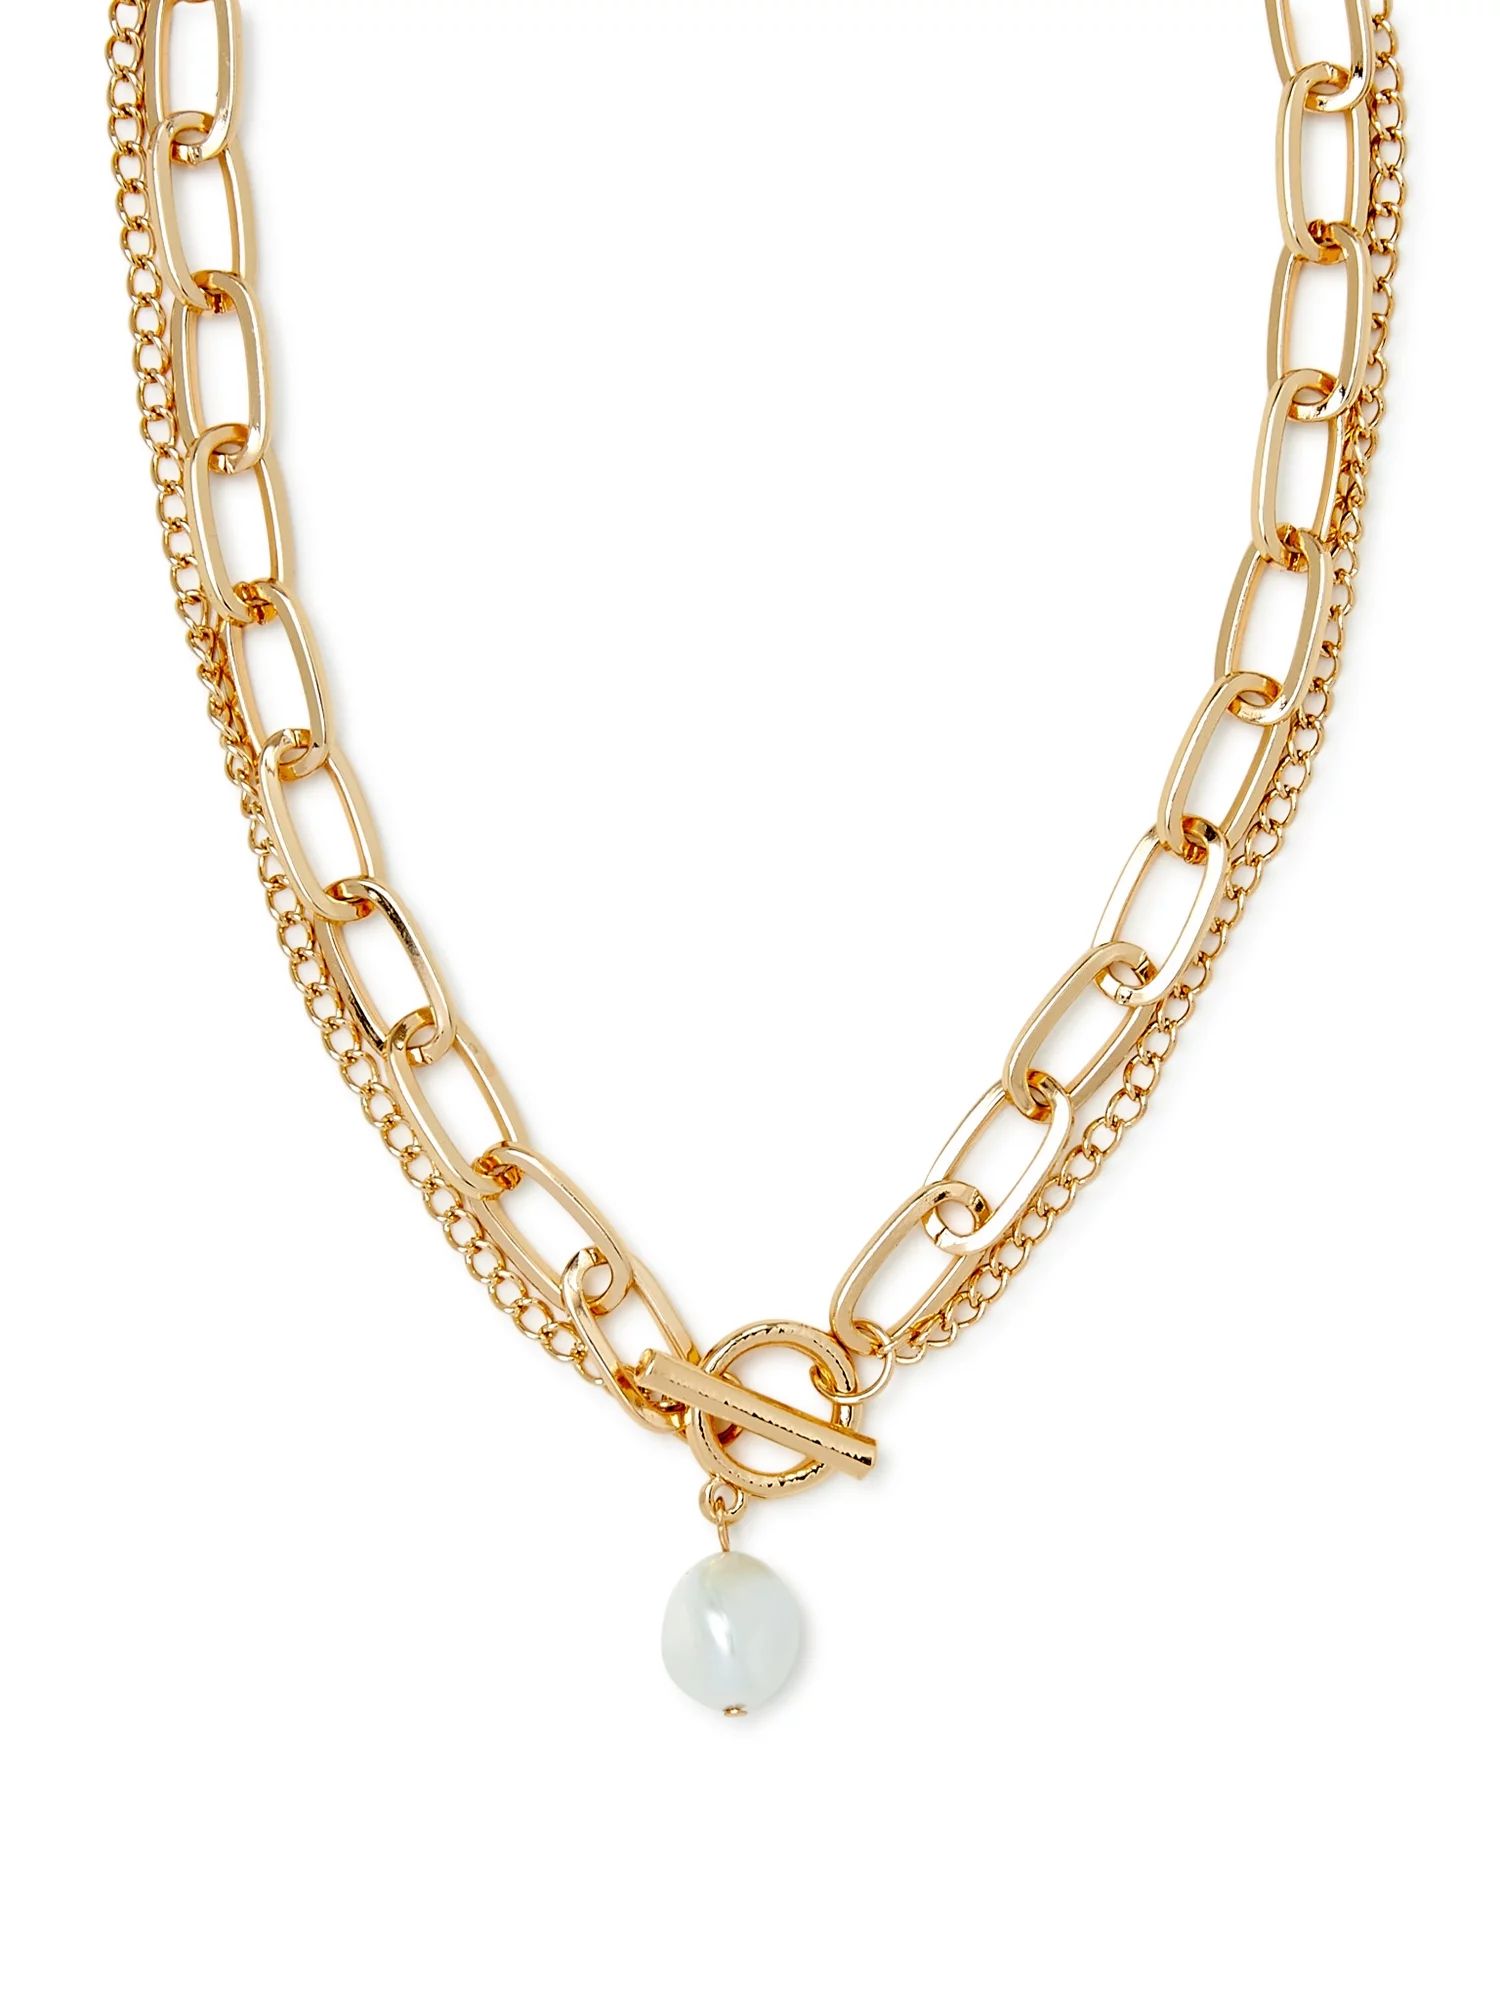 Scoop Women’s 14K Gold Flash-Plated Double Chain Link Faux Pearl Toggle Necklace, 18” + 2” ... | Walmart (US)